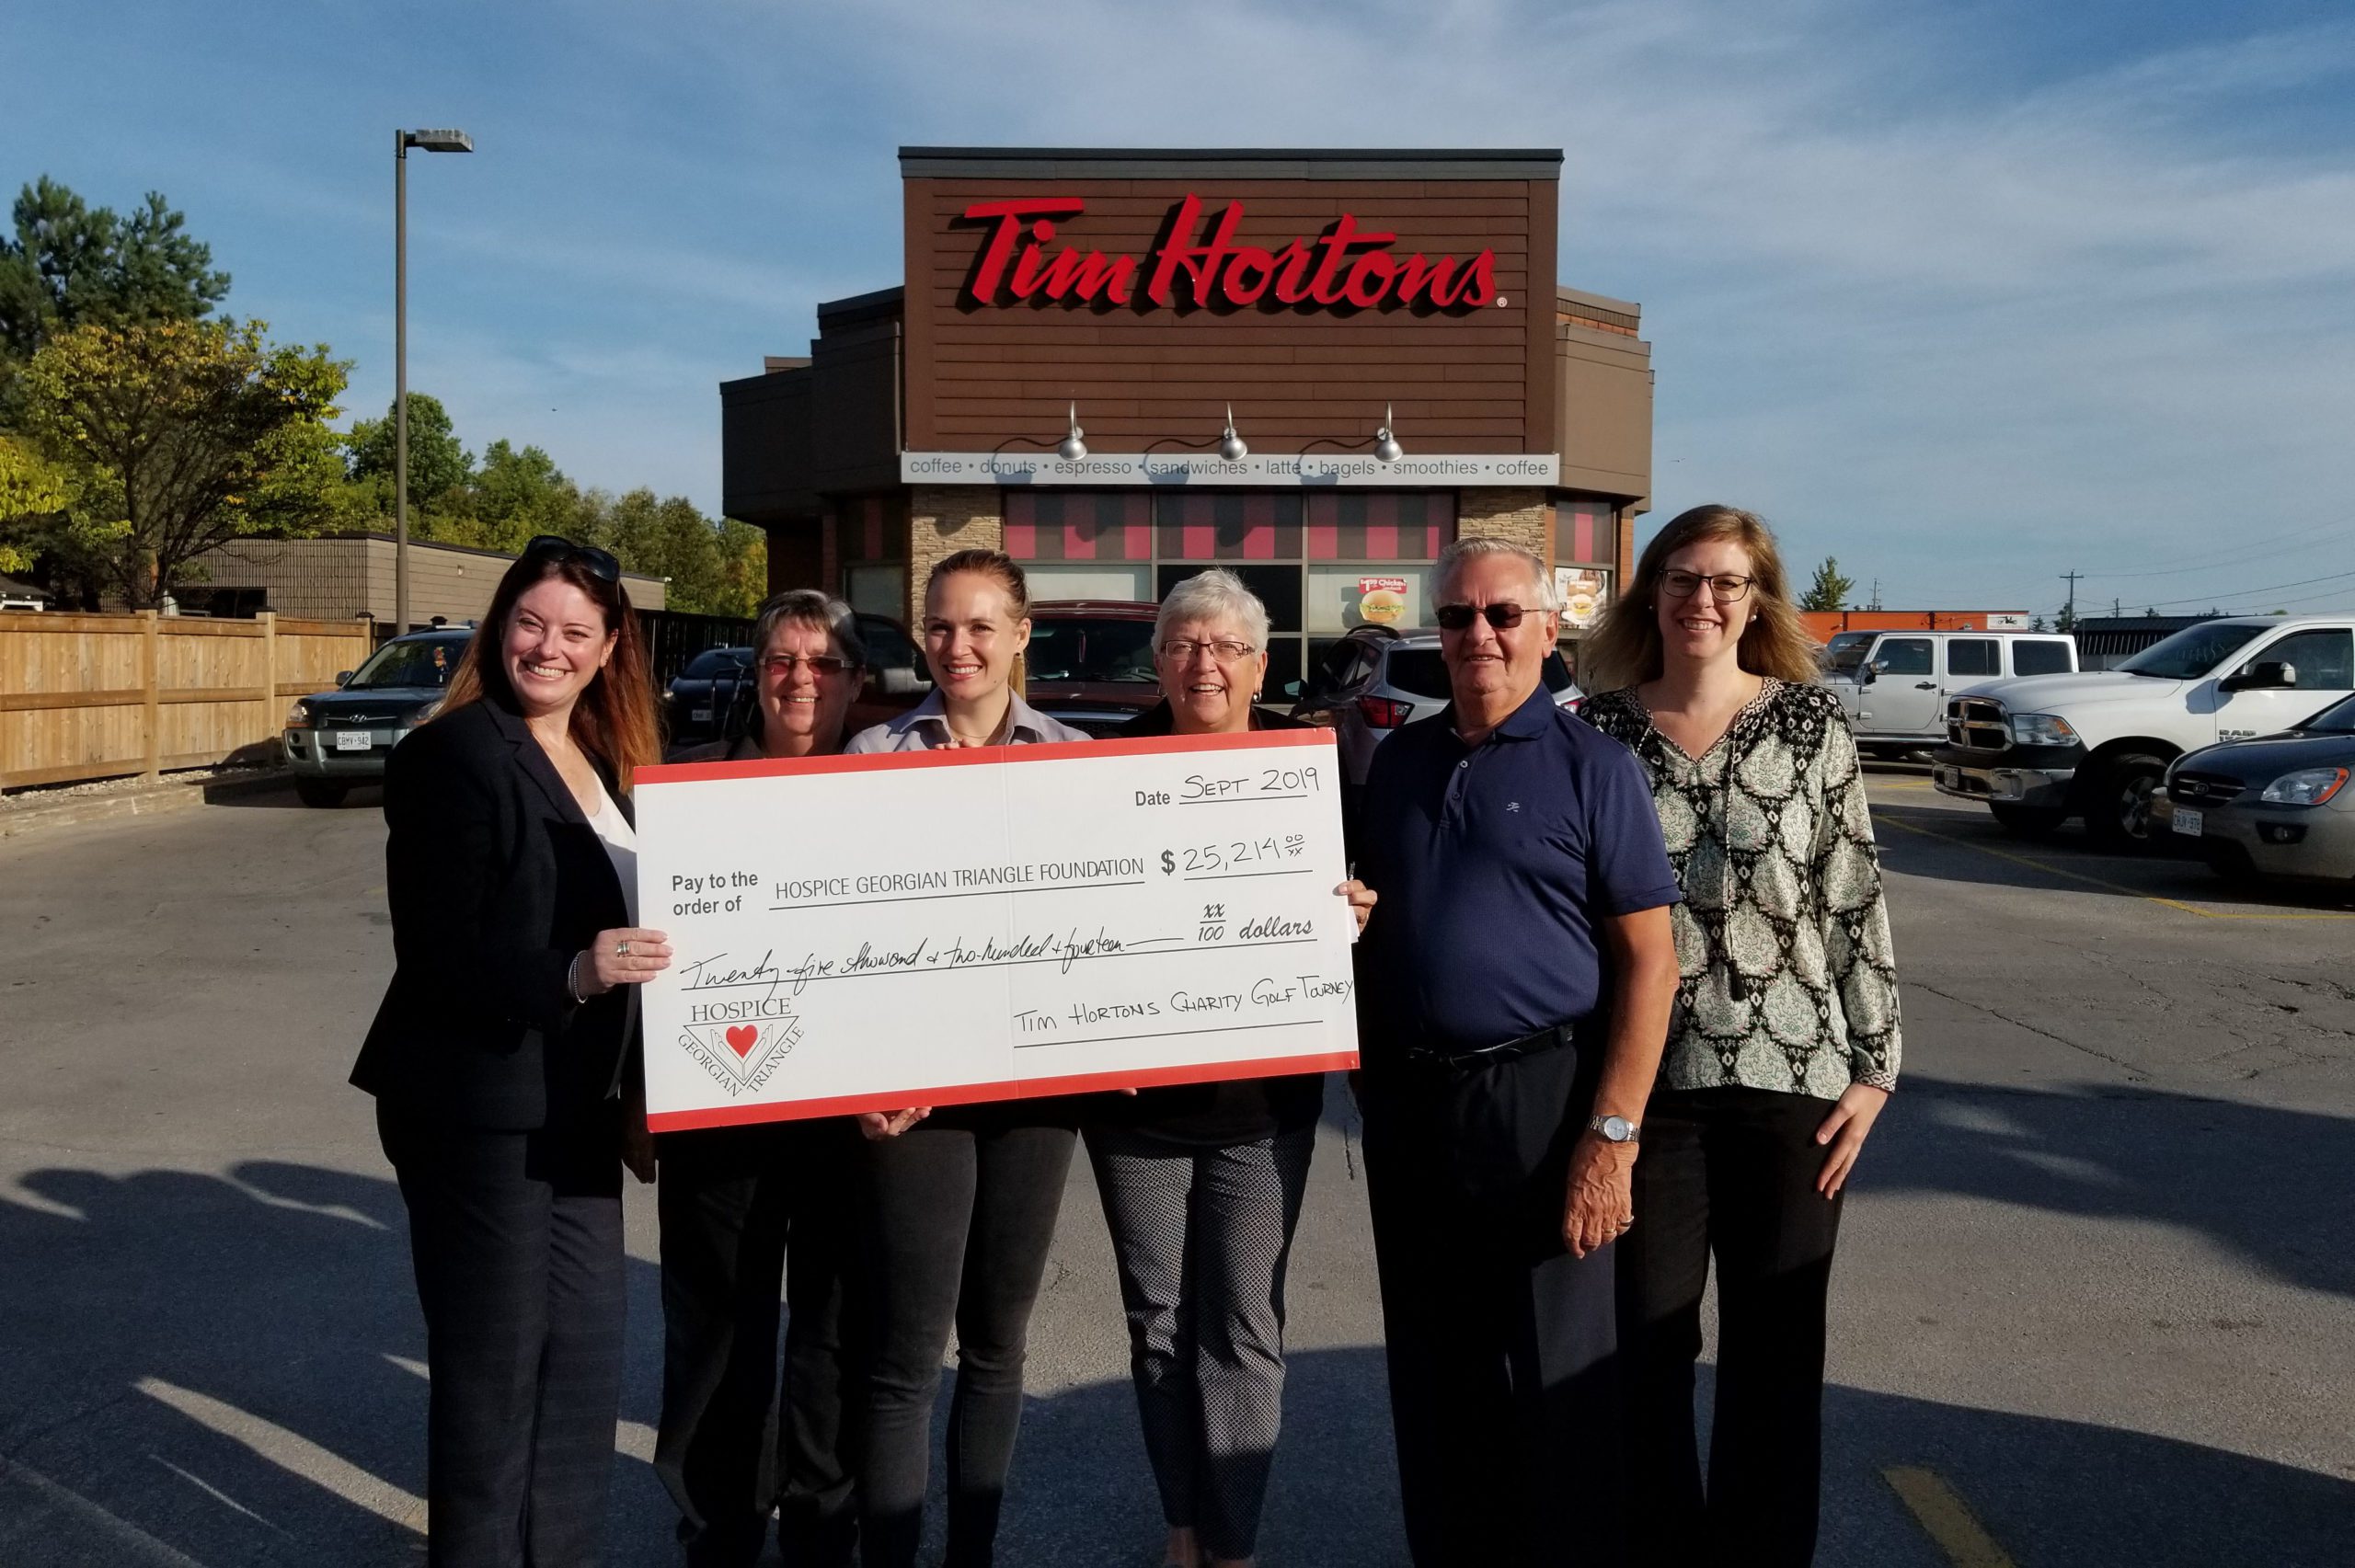 Tim Hortons Jan Trude Golf Tournament charity fundraising third party event golf tourny